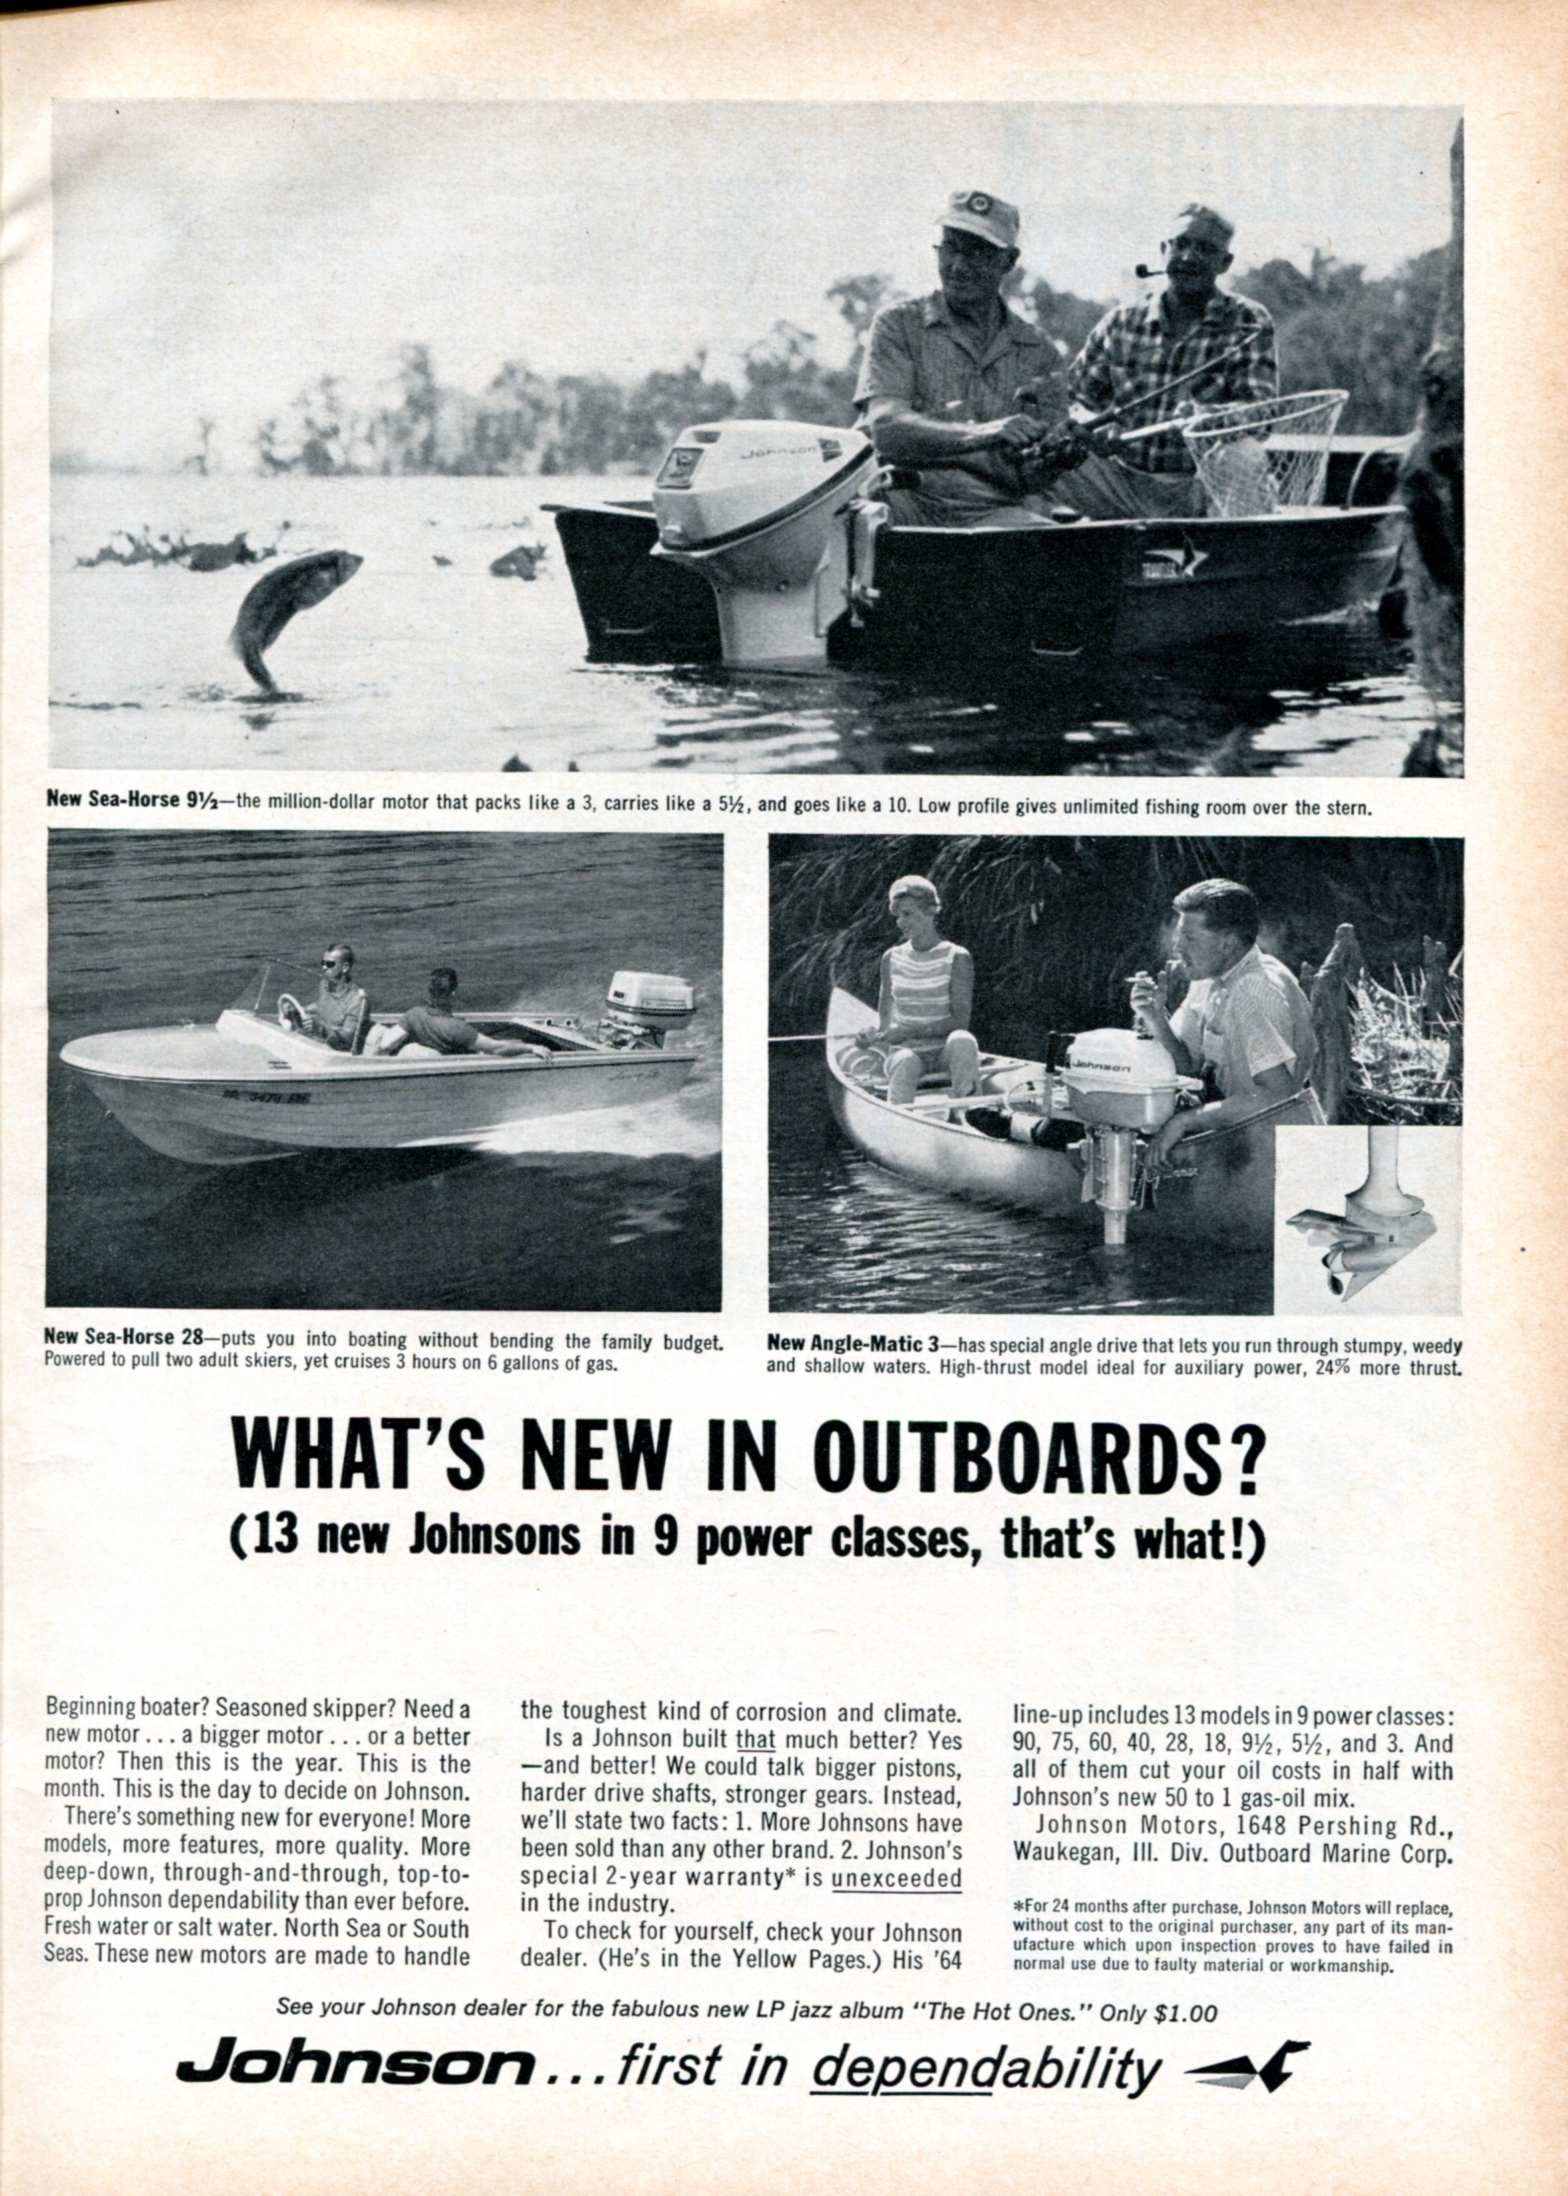 a page in an old magazine with images of people in boats and dolphin